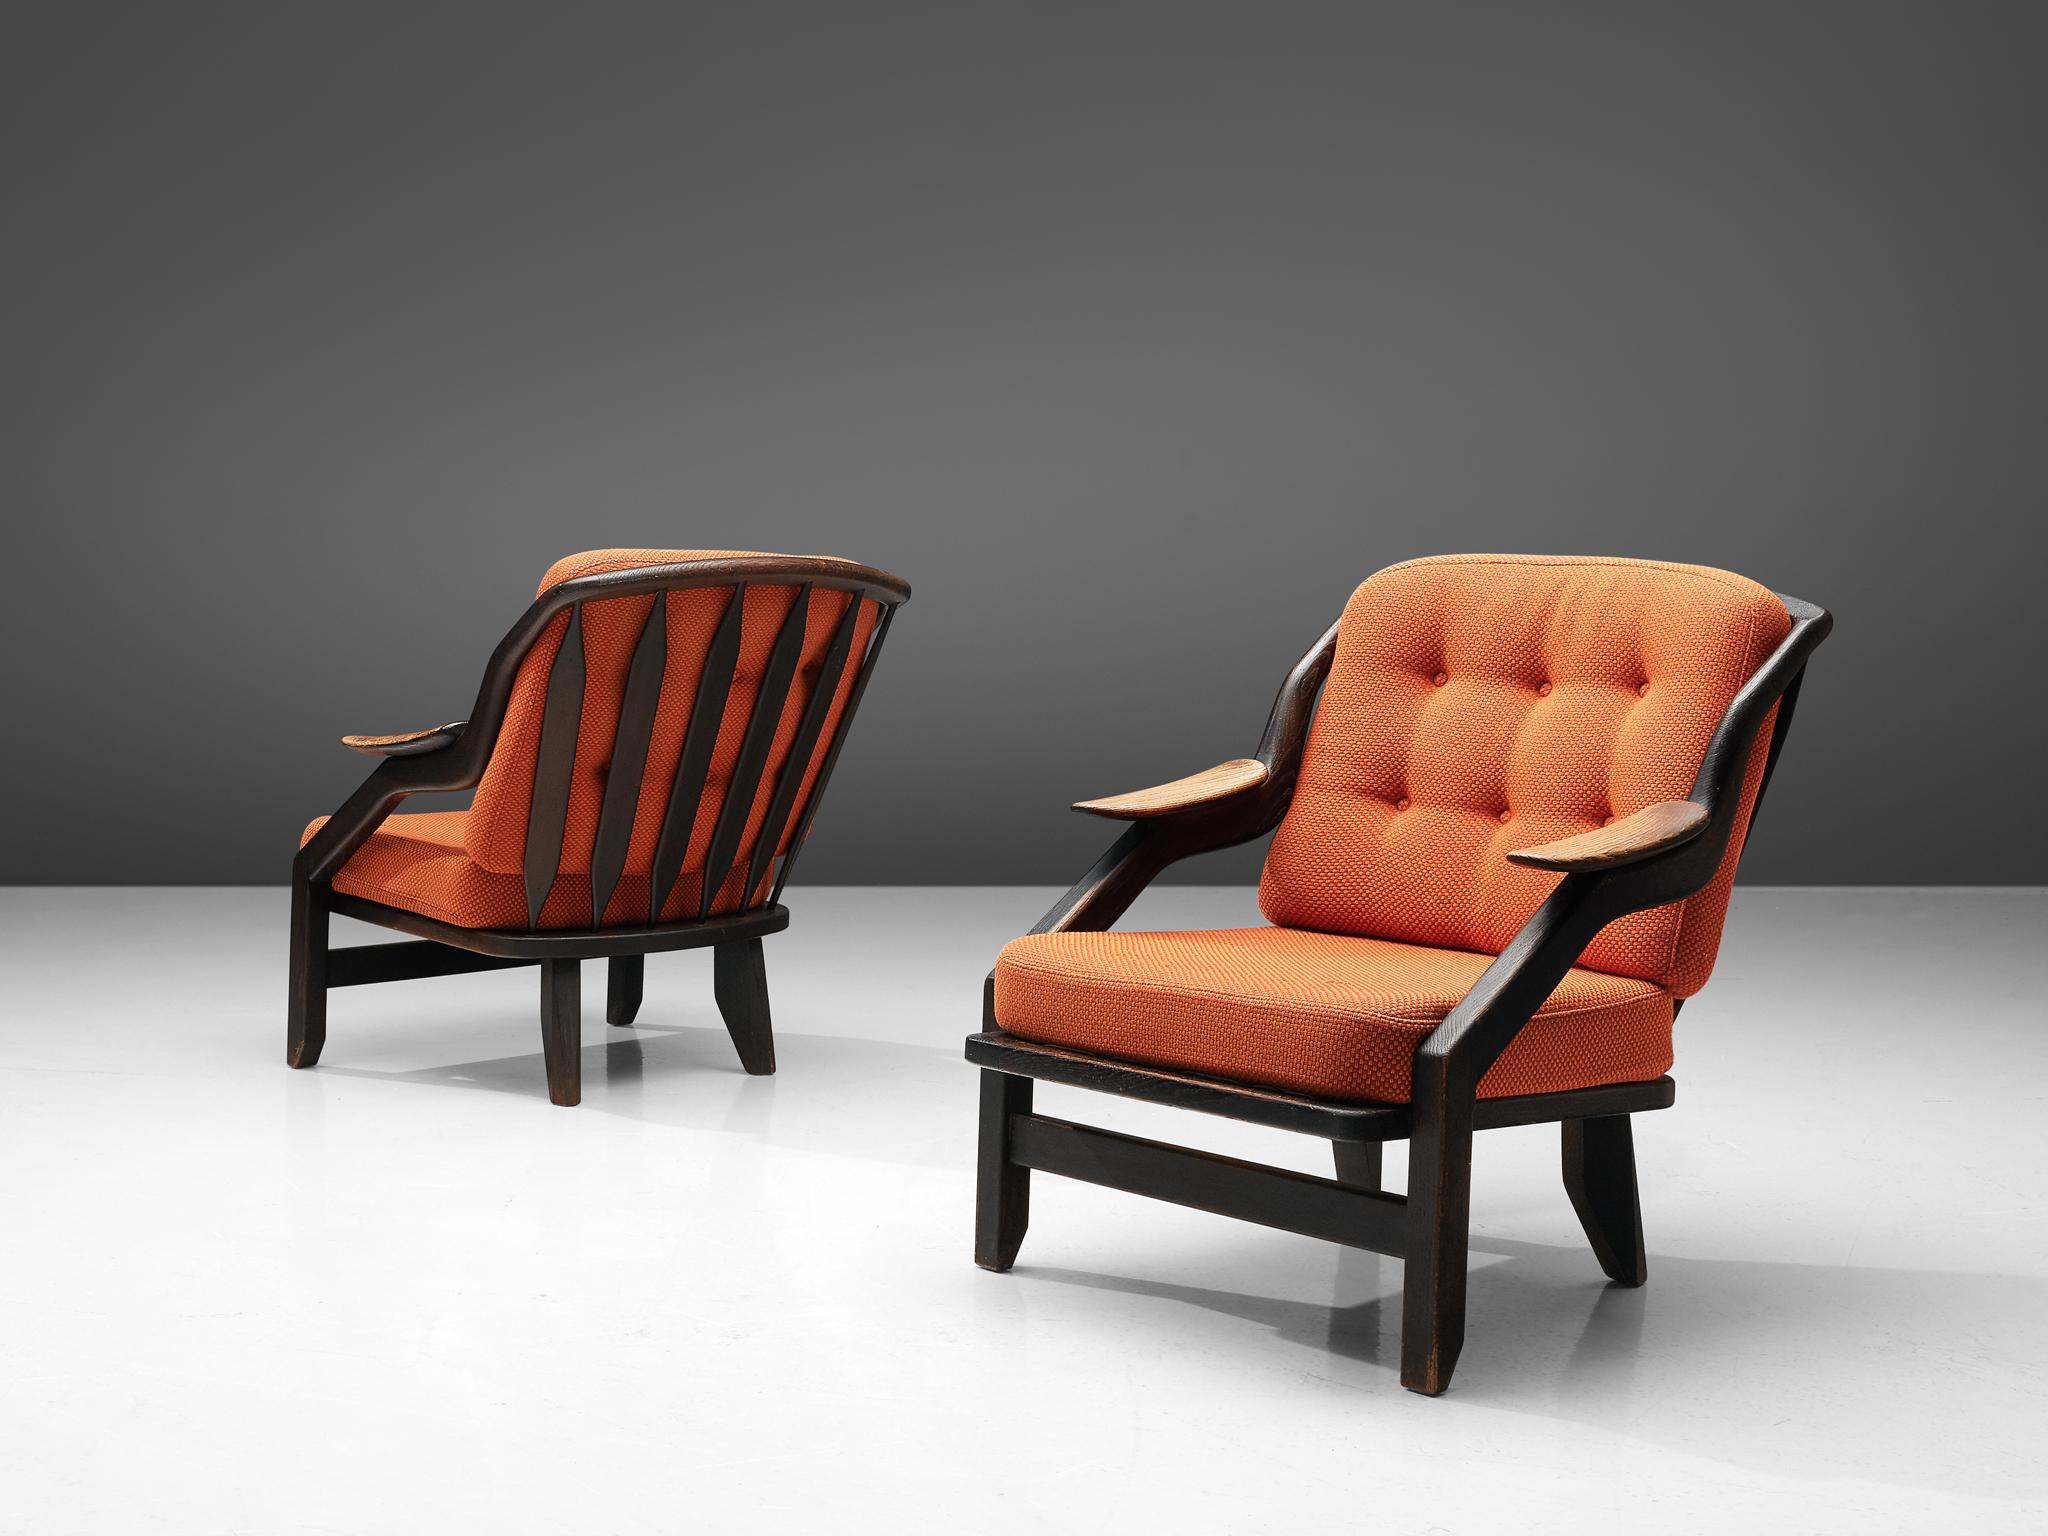 Guillerme & Chambron, pair of lounge chairs, orange fabric and dark stained oak, France, 1950s.

A pair of lounge chairs by Guillerme et Chambron, this French designer duo is known for their extreme high quality solid oak furniture, from which